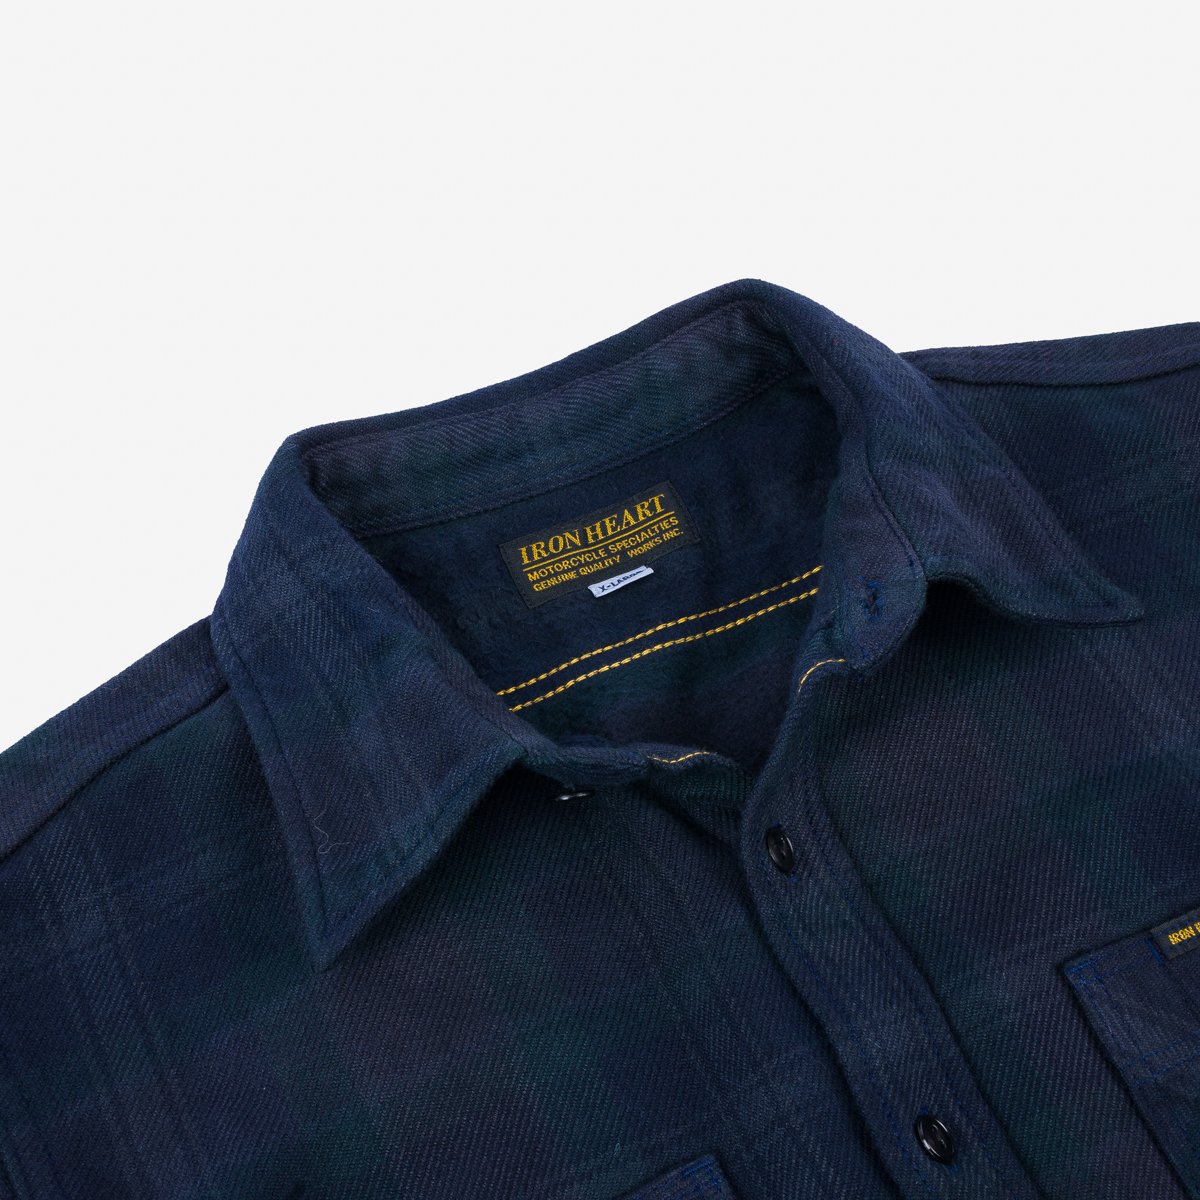 Iron Heart Ultra Heavy Flannel Crazy Check Work Shirt - Navy Overdyed Black